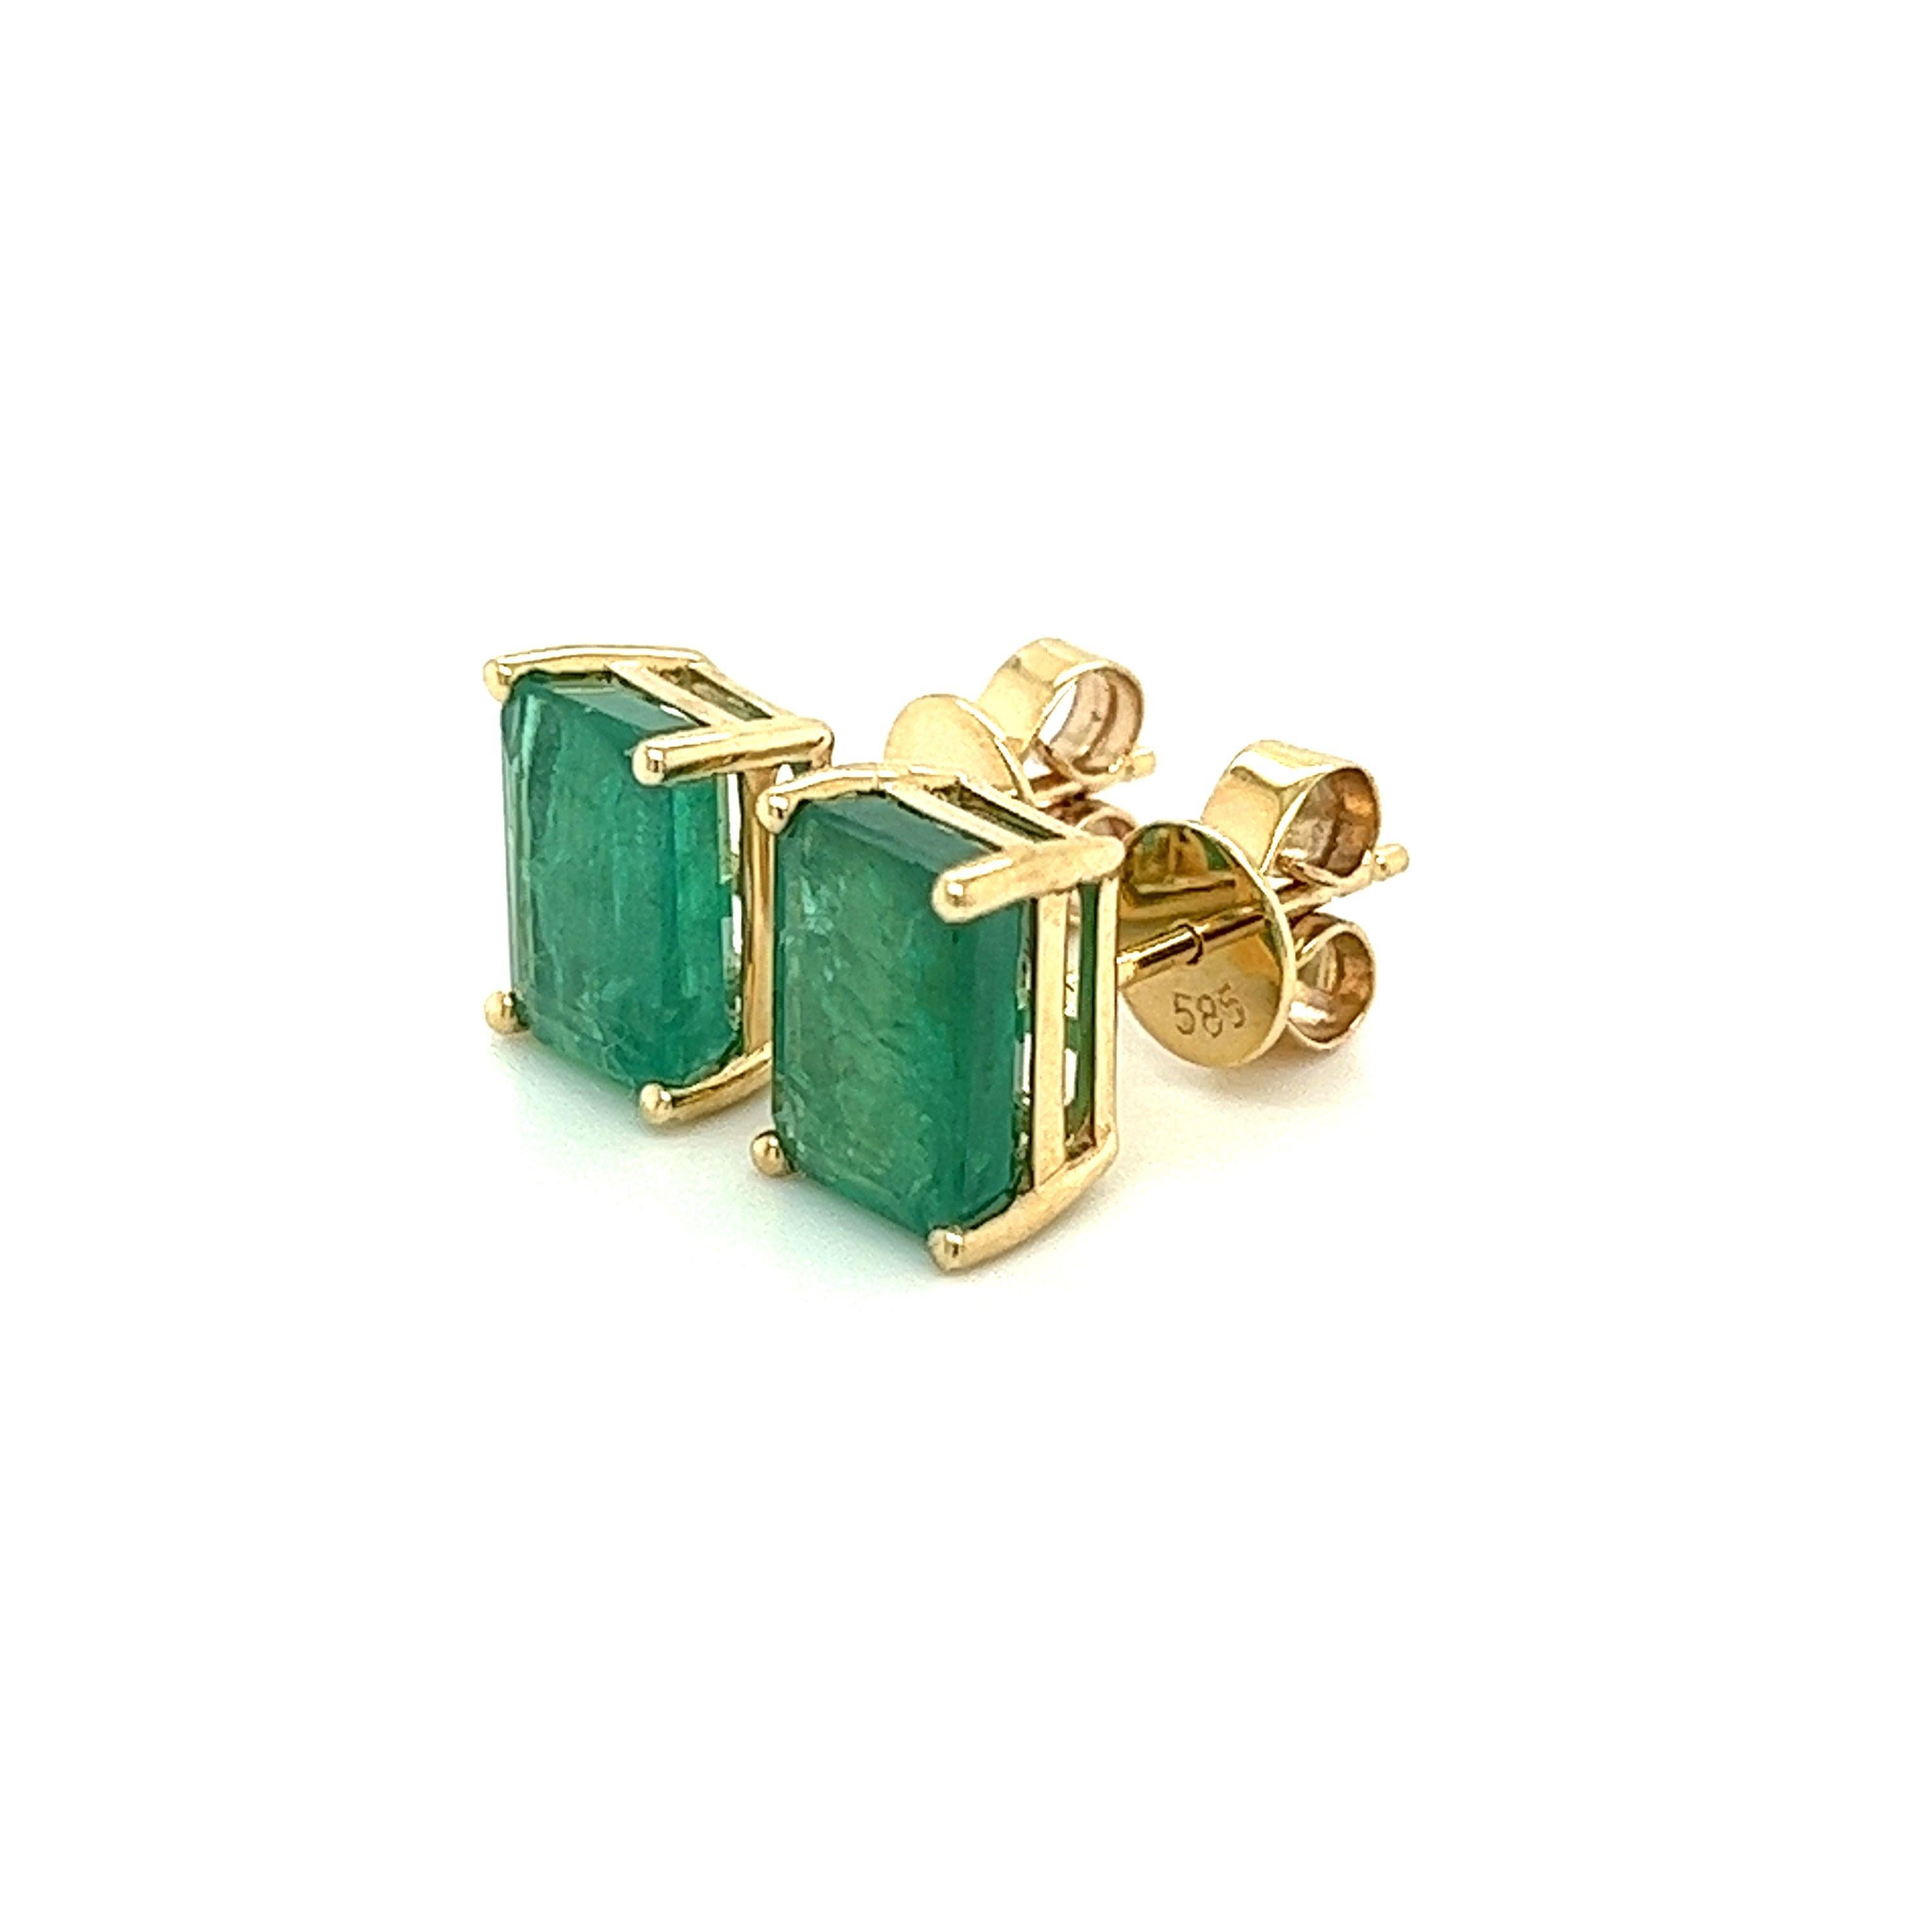 4.7 Carat Total Emerald Stud Earrings in 4-Prong 14k Solid Yellow Gold For Sale 4